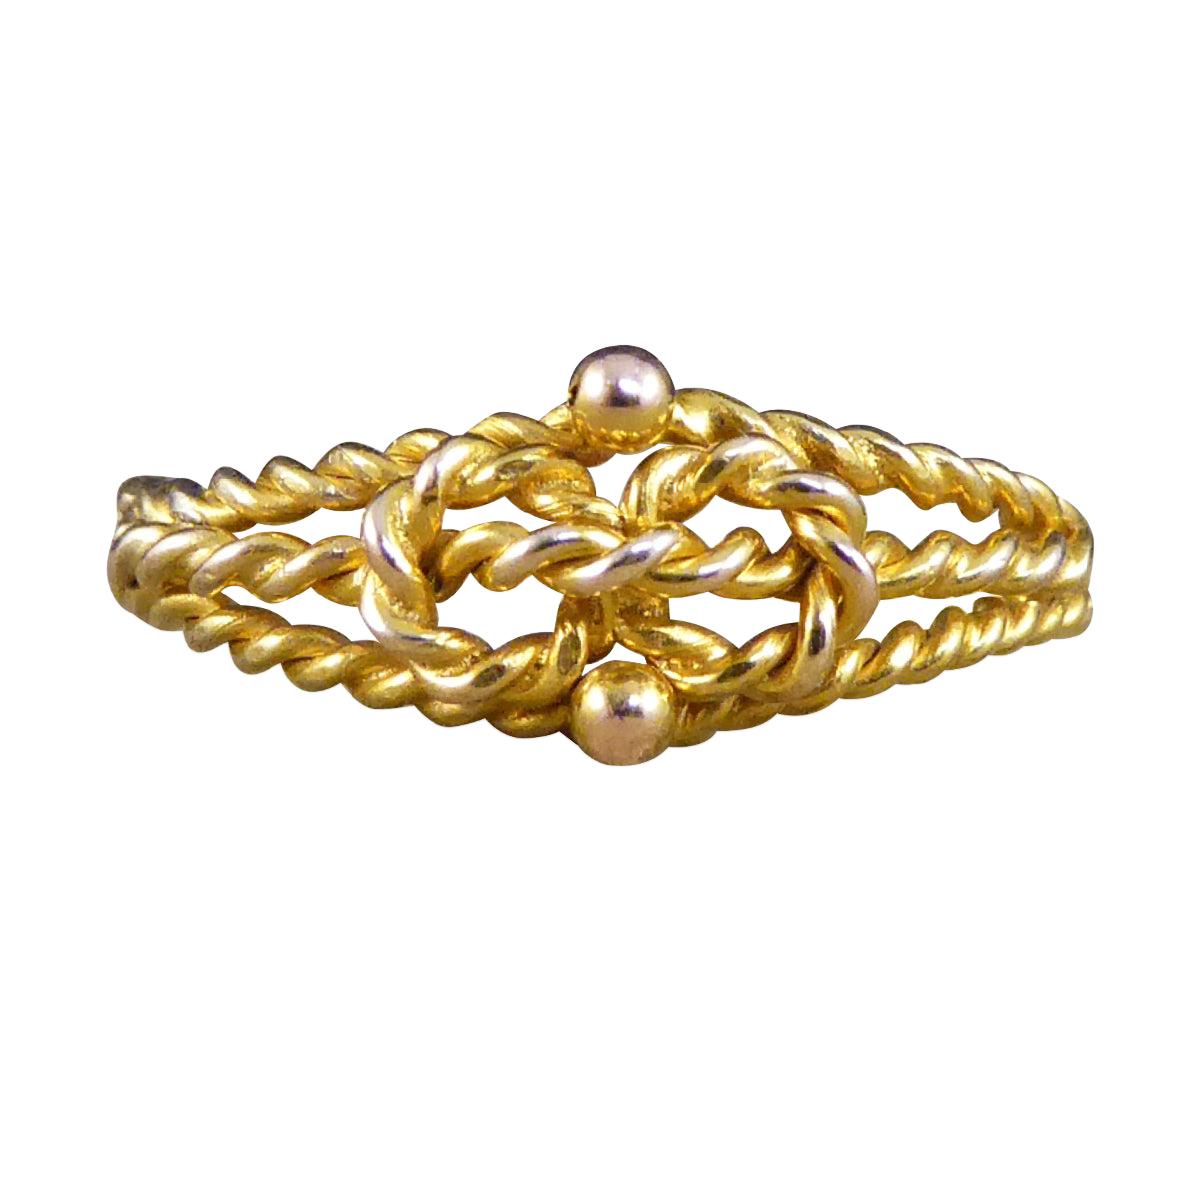 Edwardian Love Knot Ring Crafted in 9ct Yellow Gold